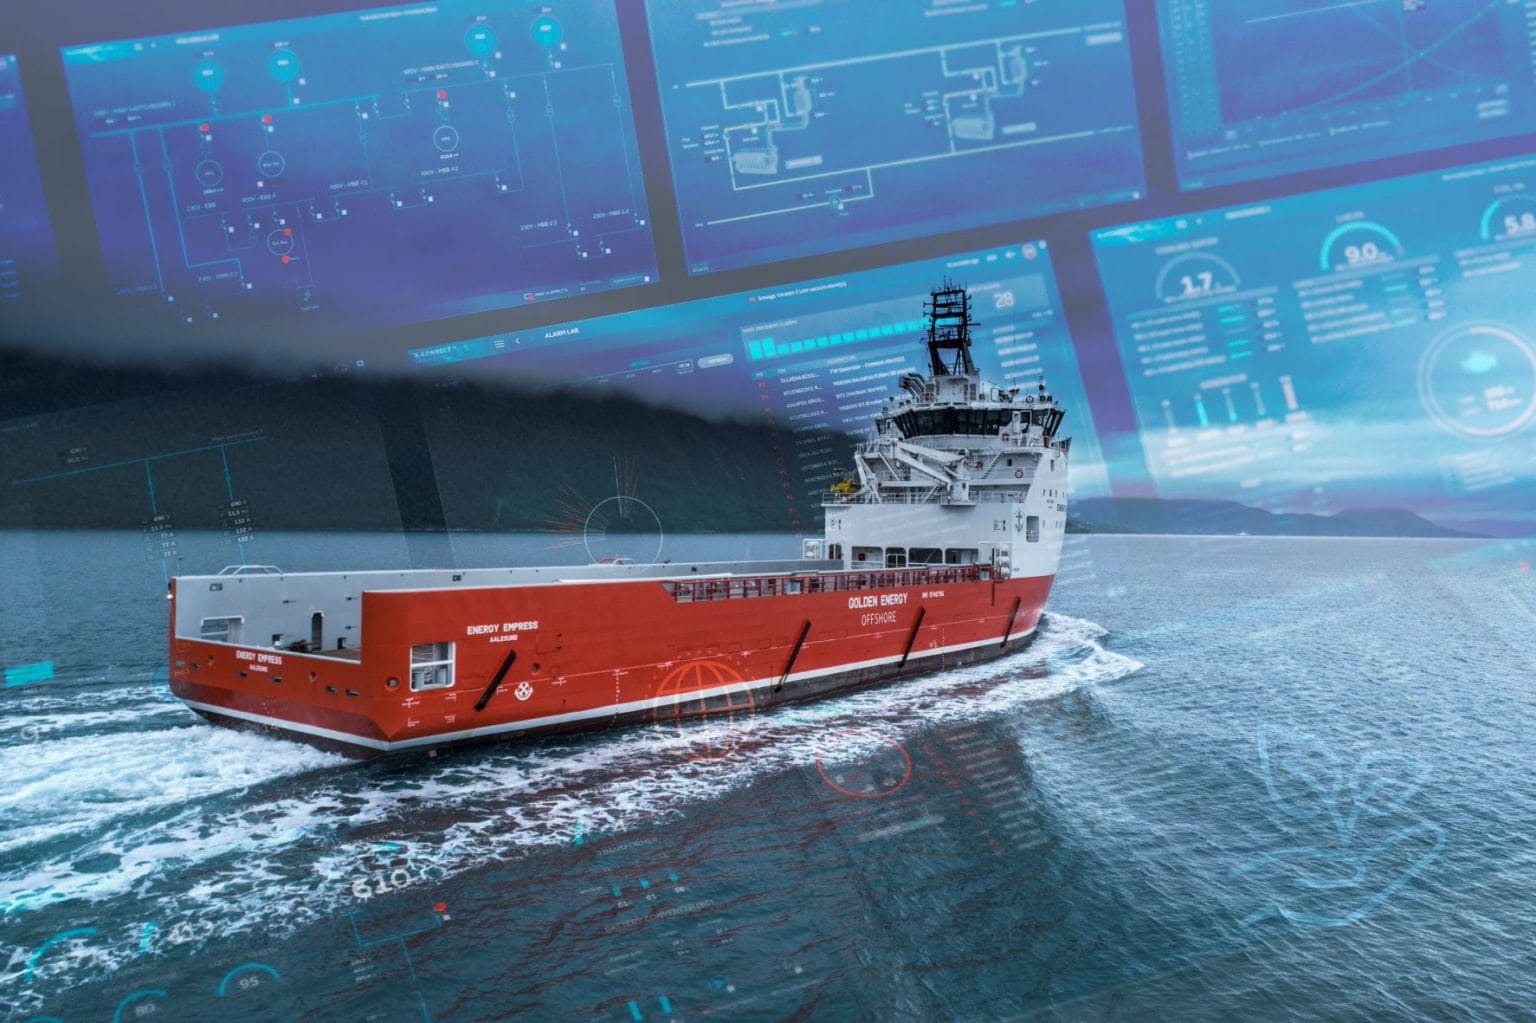 Two Norwegian players join forces to pursue hydrogen potential in maritime sector as “fuel for the future”